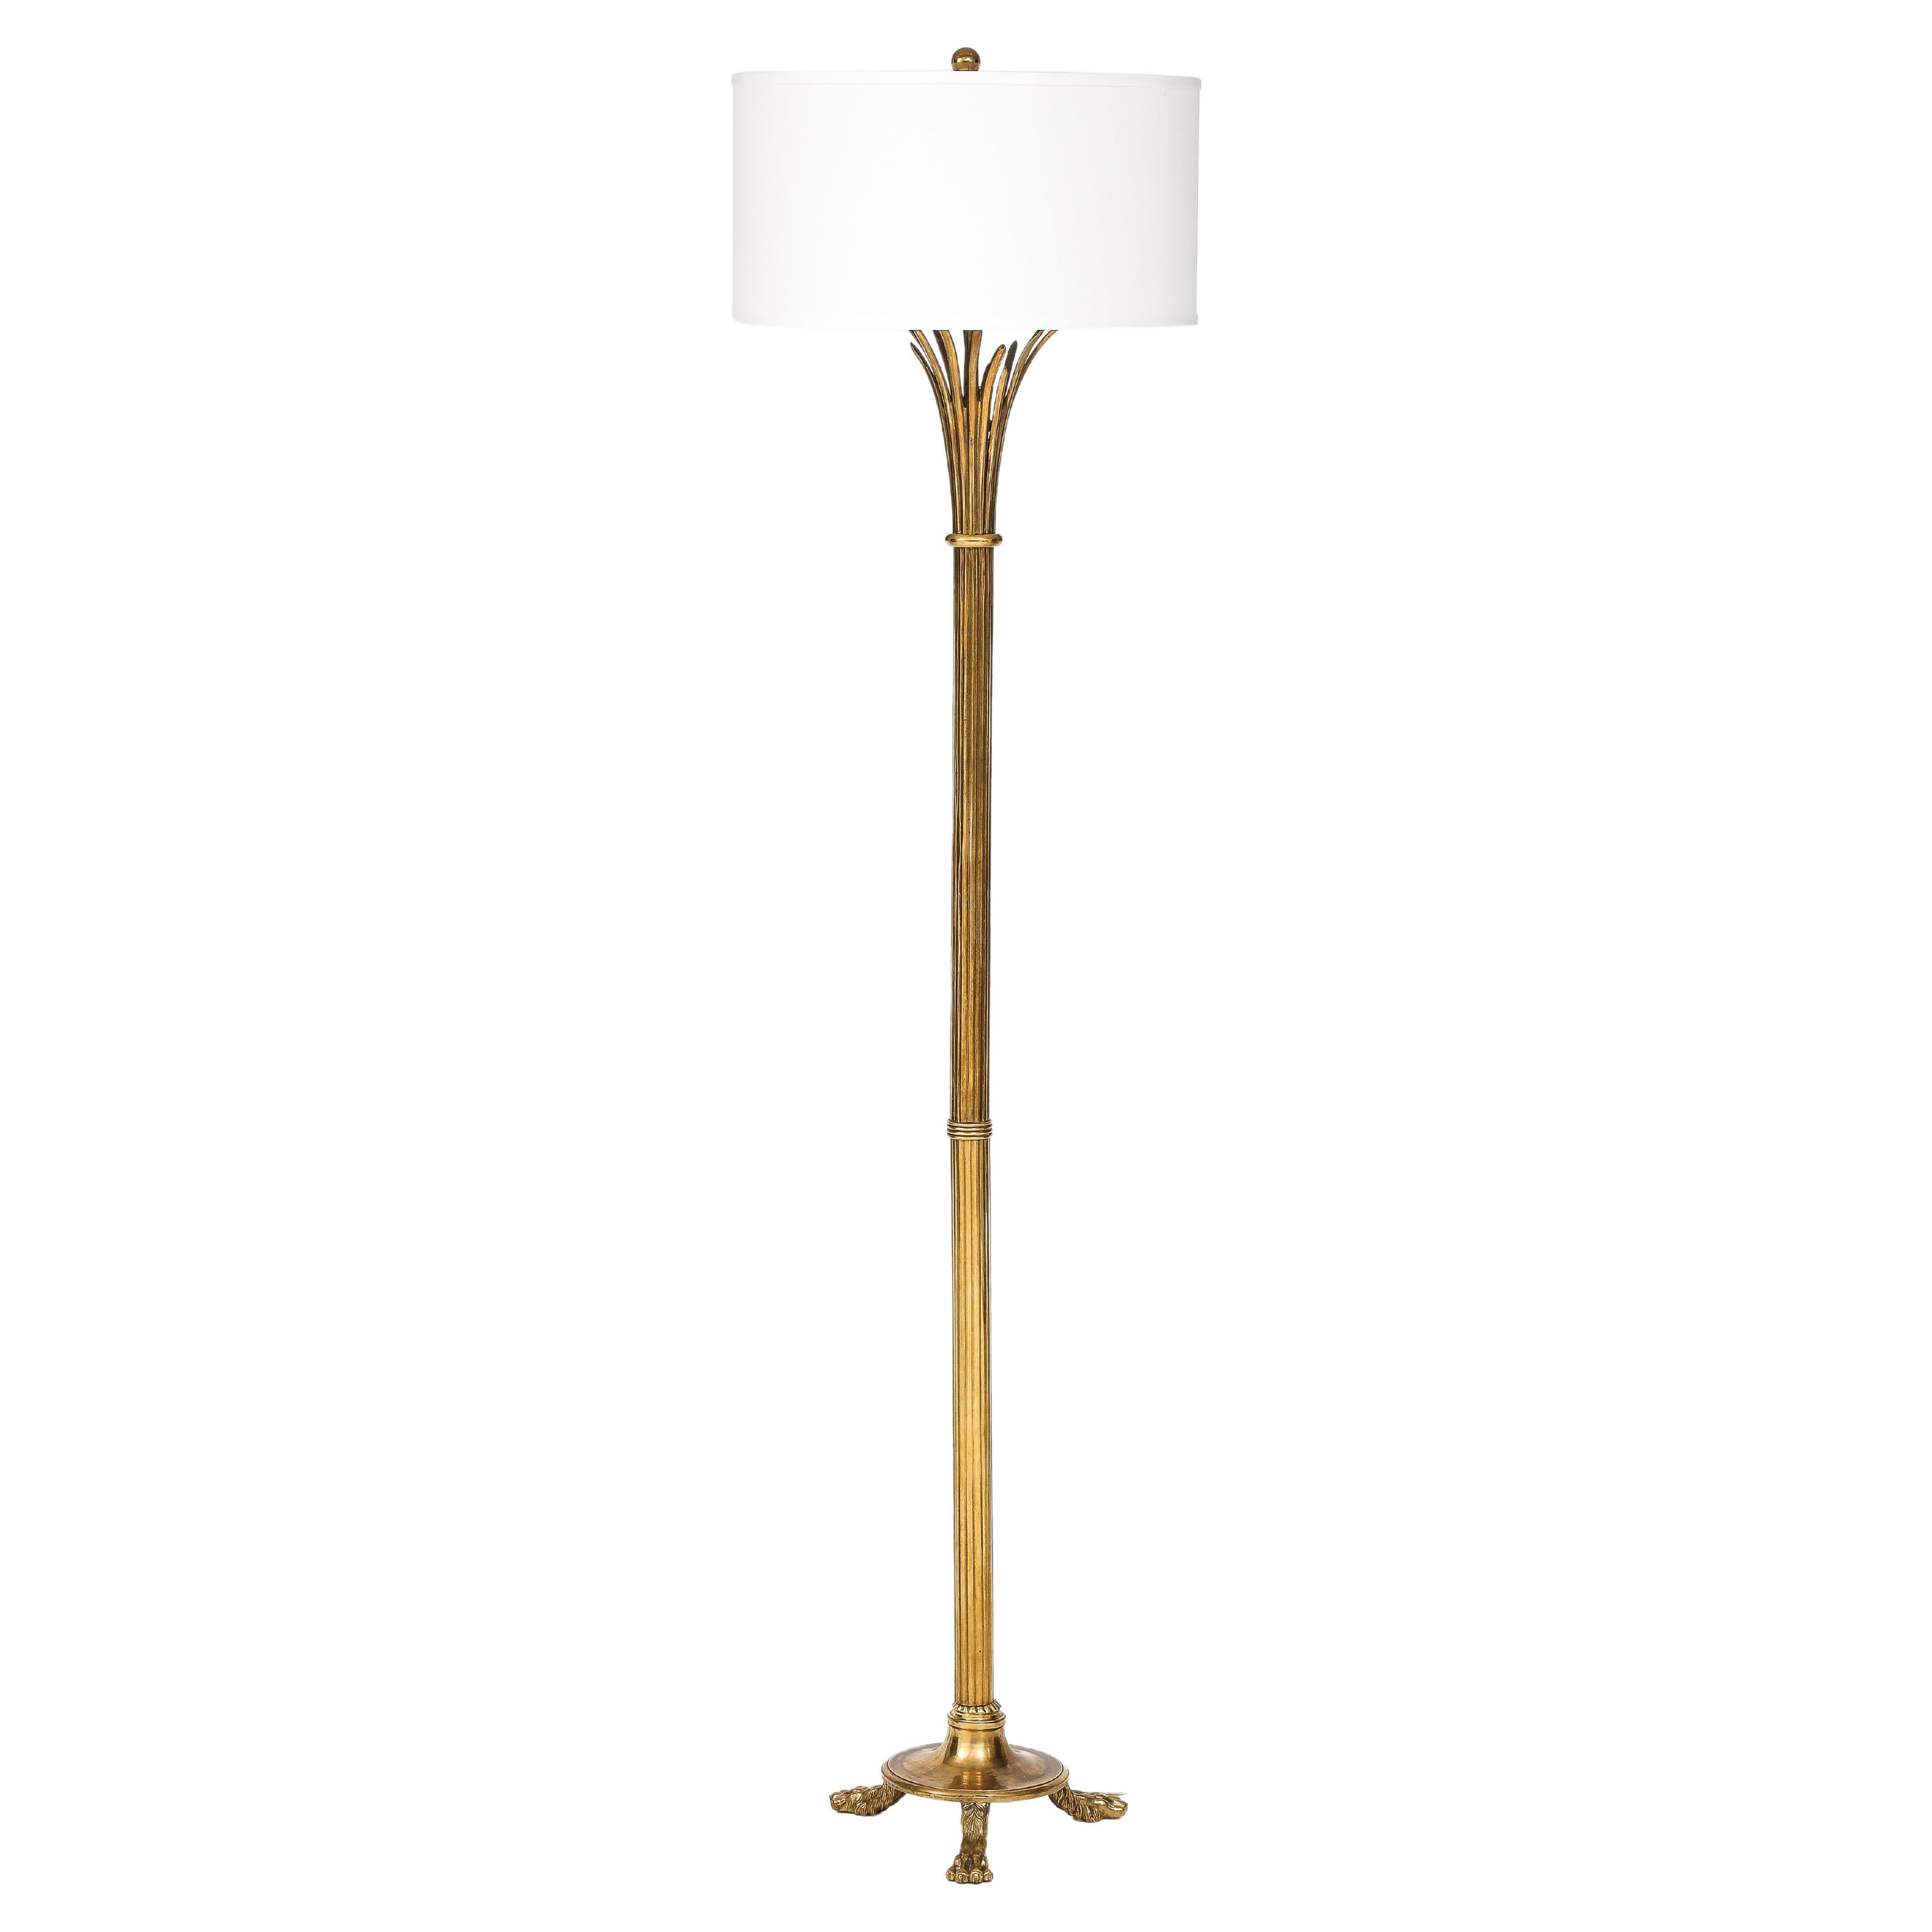 1960's French Brass Tripod Floor Lamp For Sale